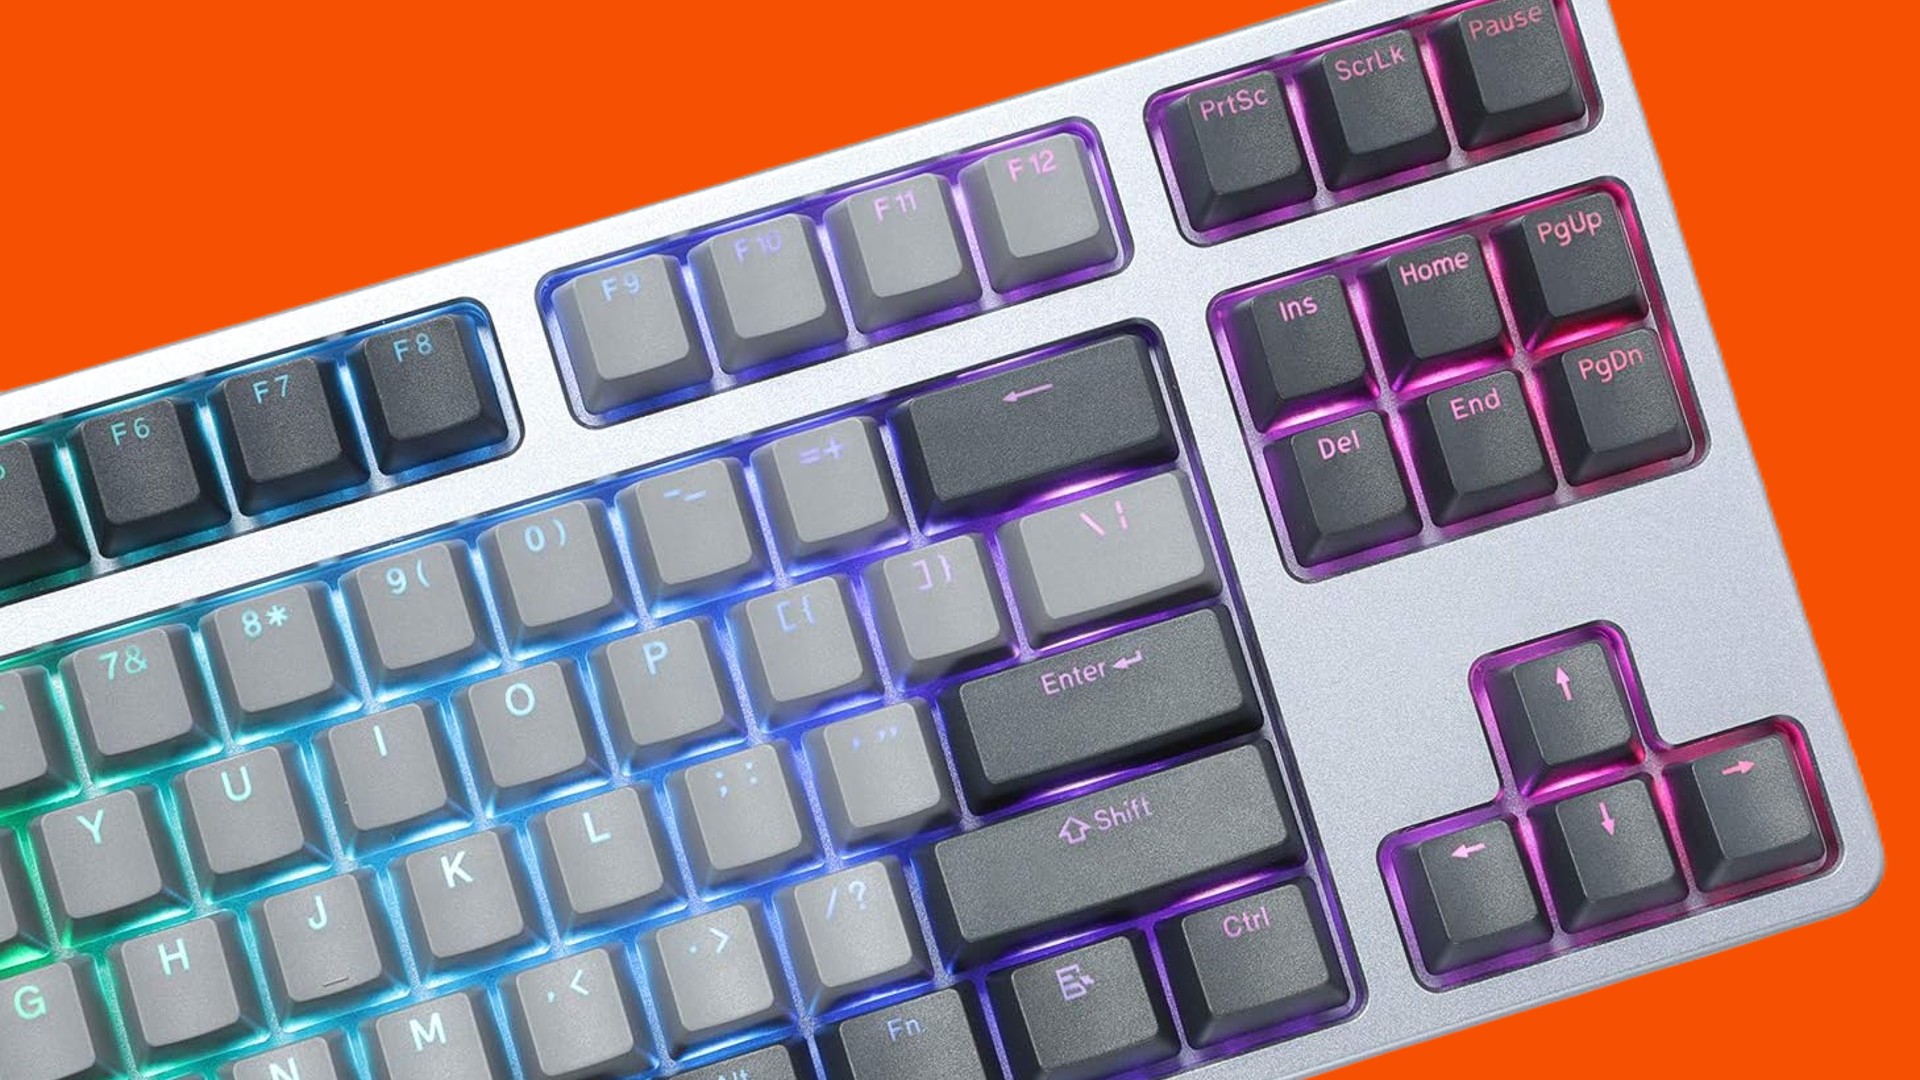 Save up to 45% on these incredible Drop mechanical keyboards right now